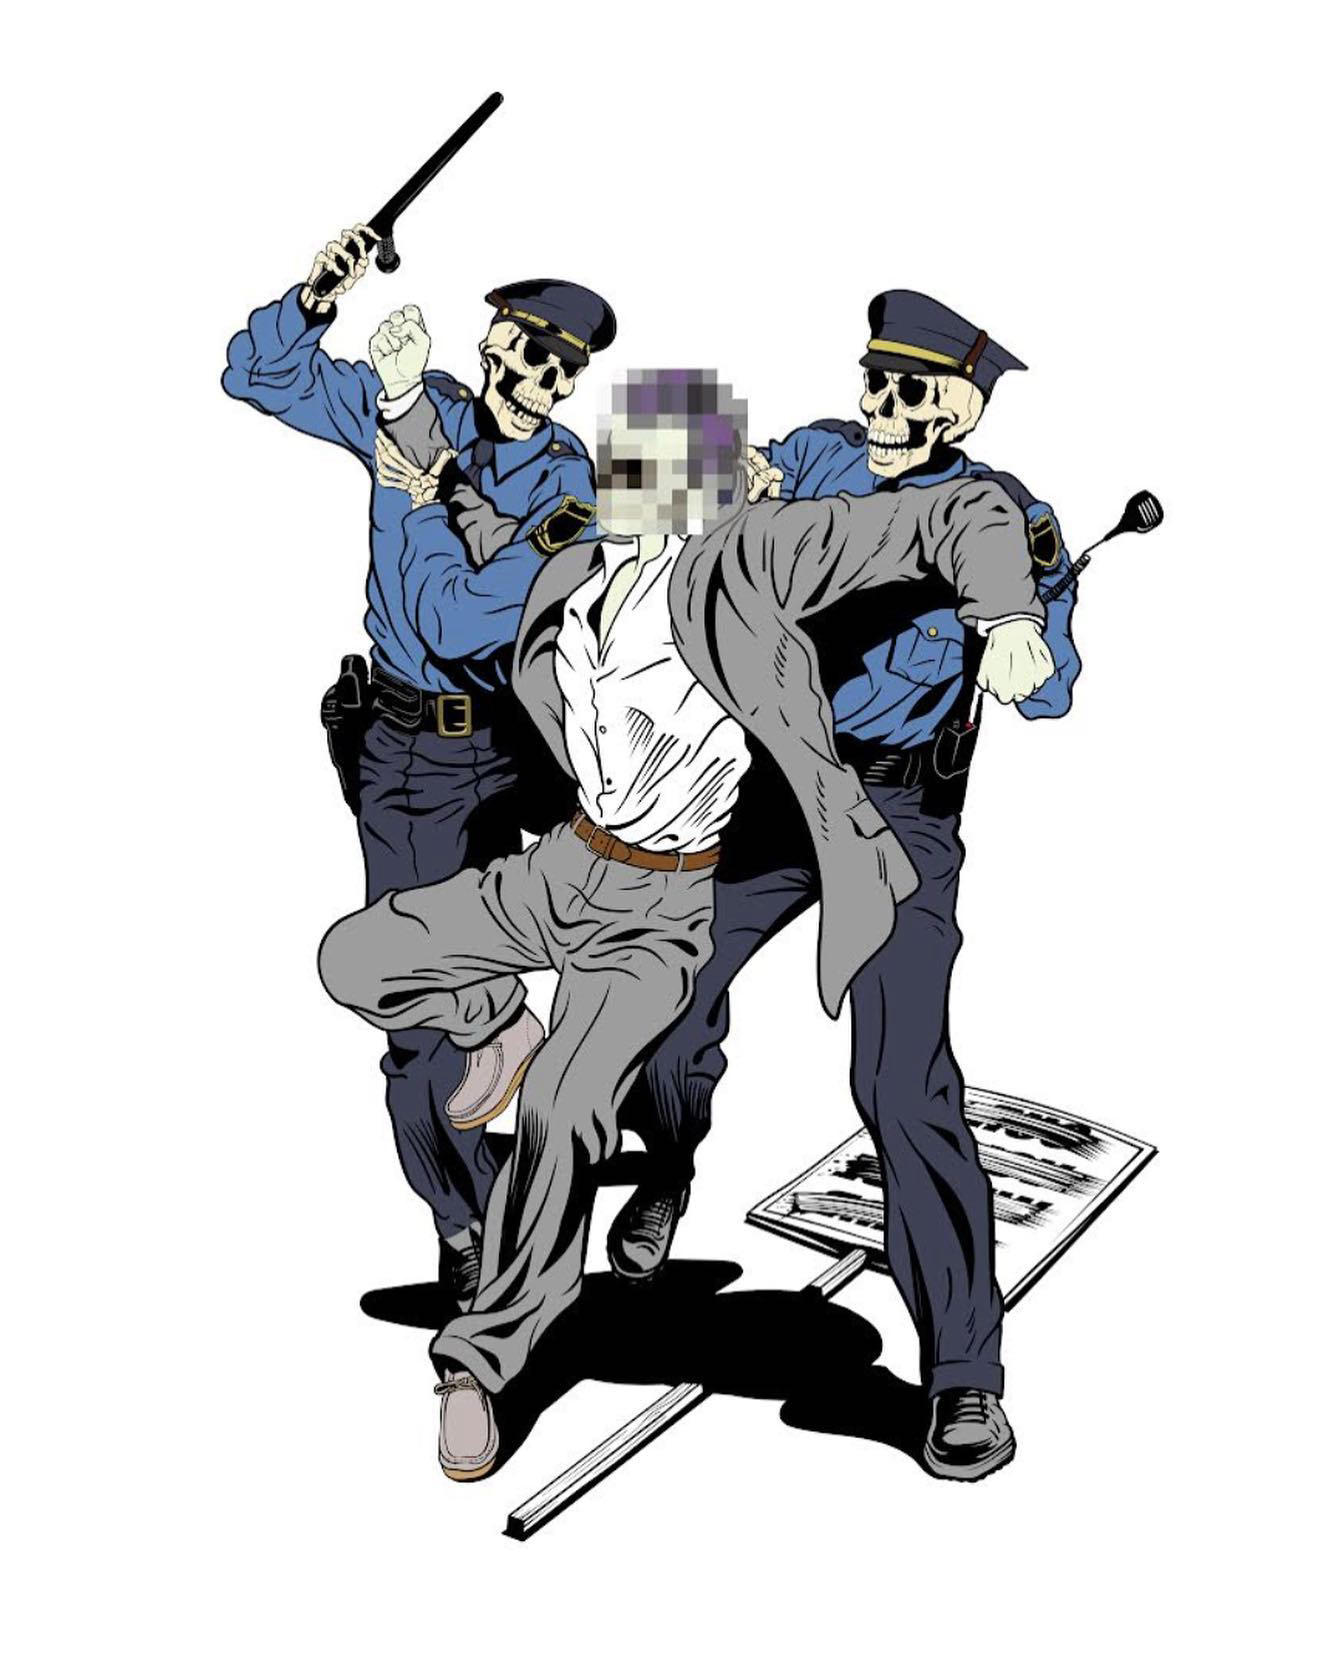 DFace - Today we relaunch our #amnestyillustrations series for our new campaign #ProtectTheProtest